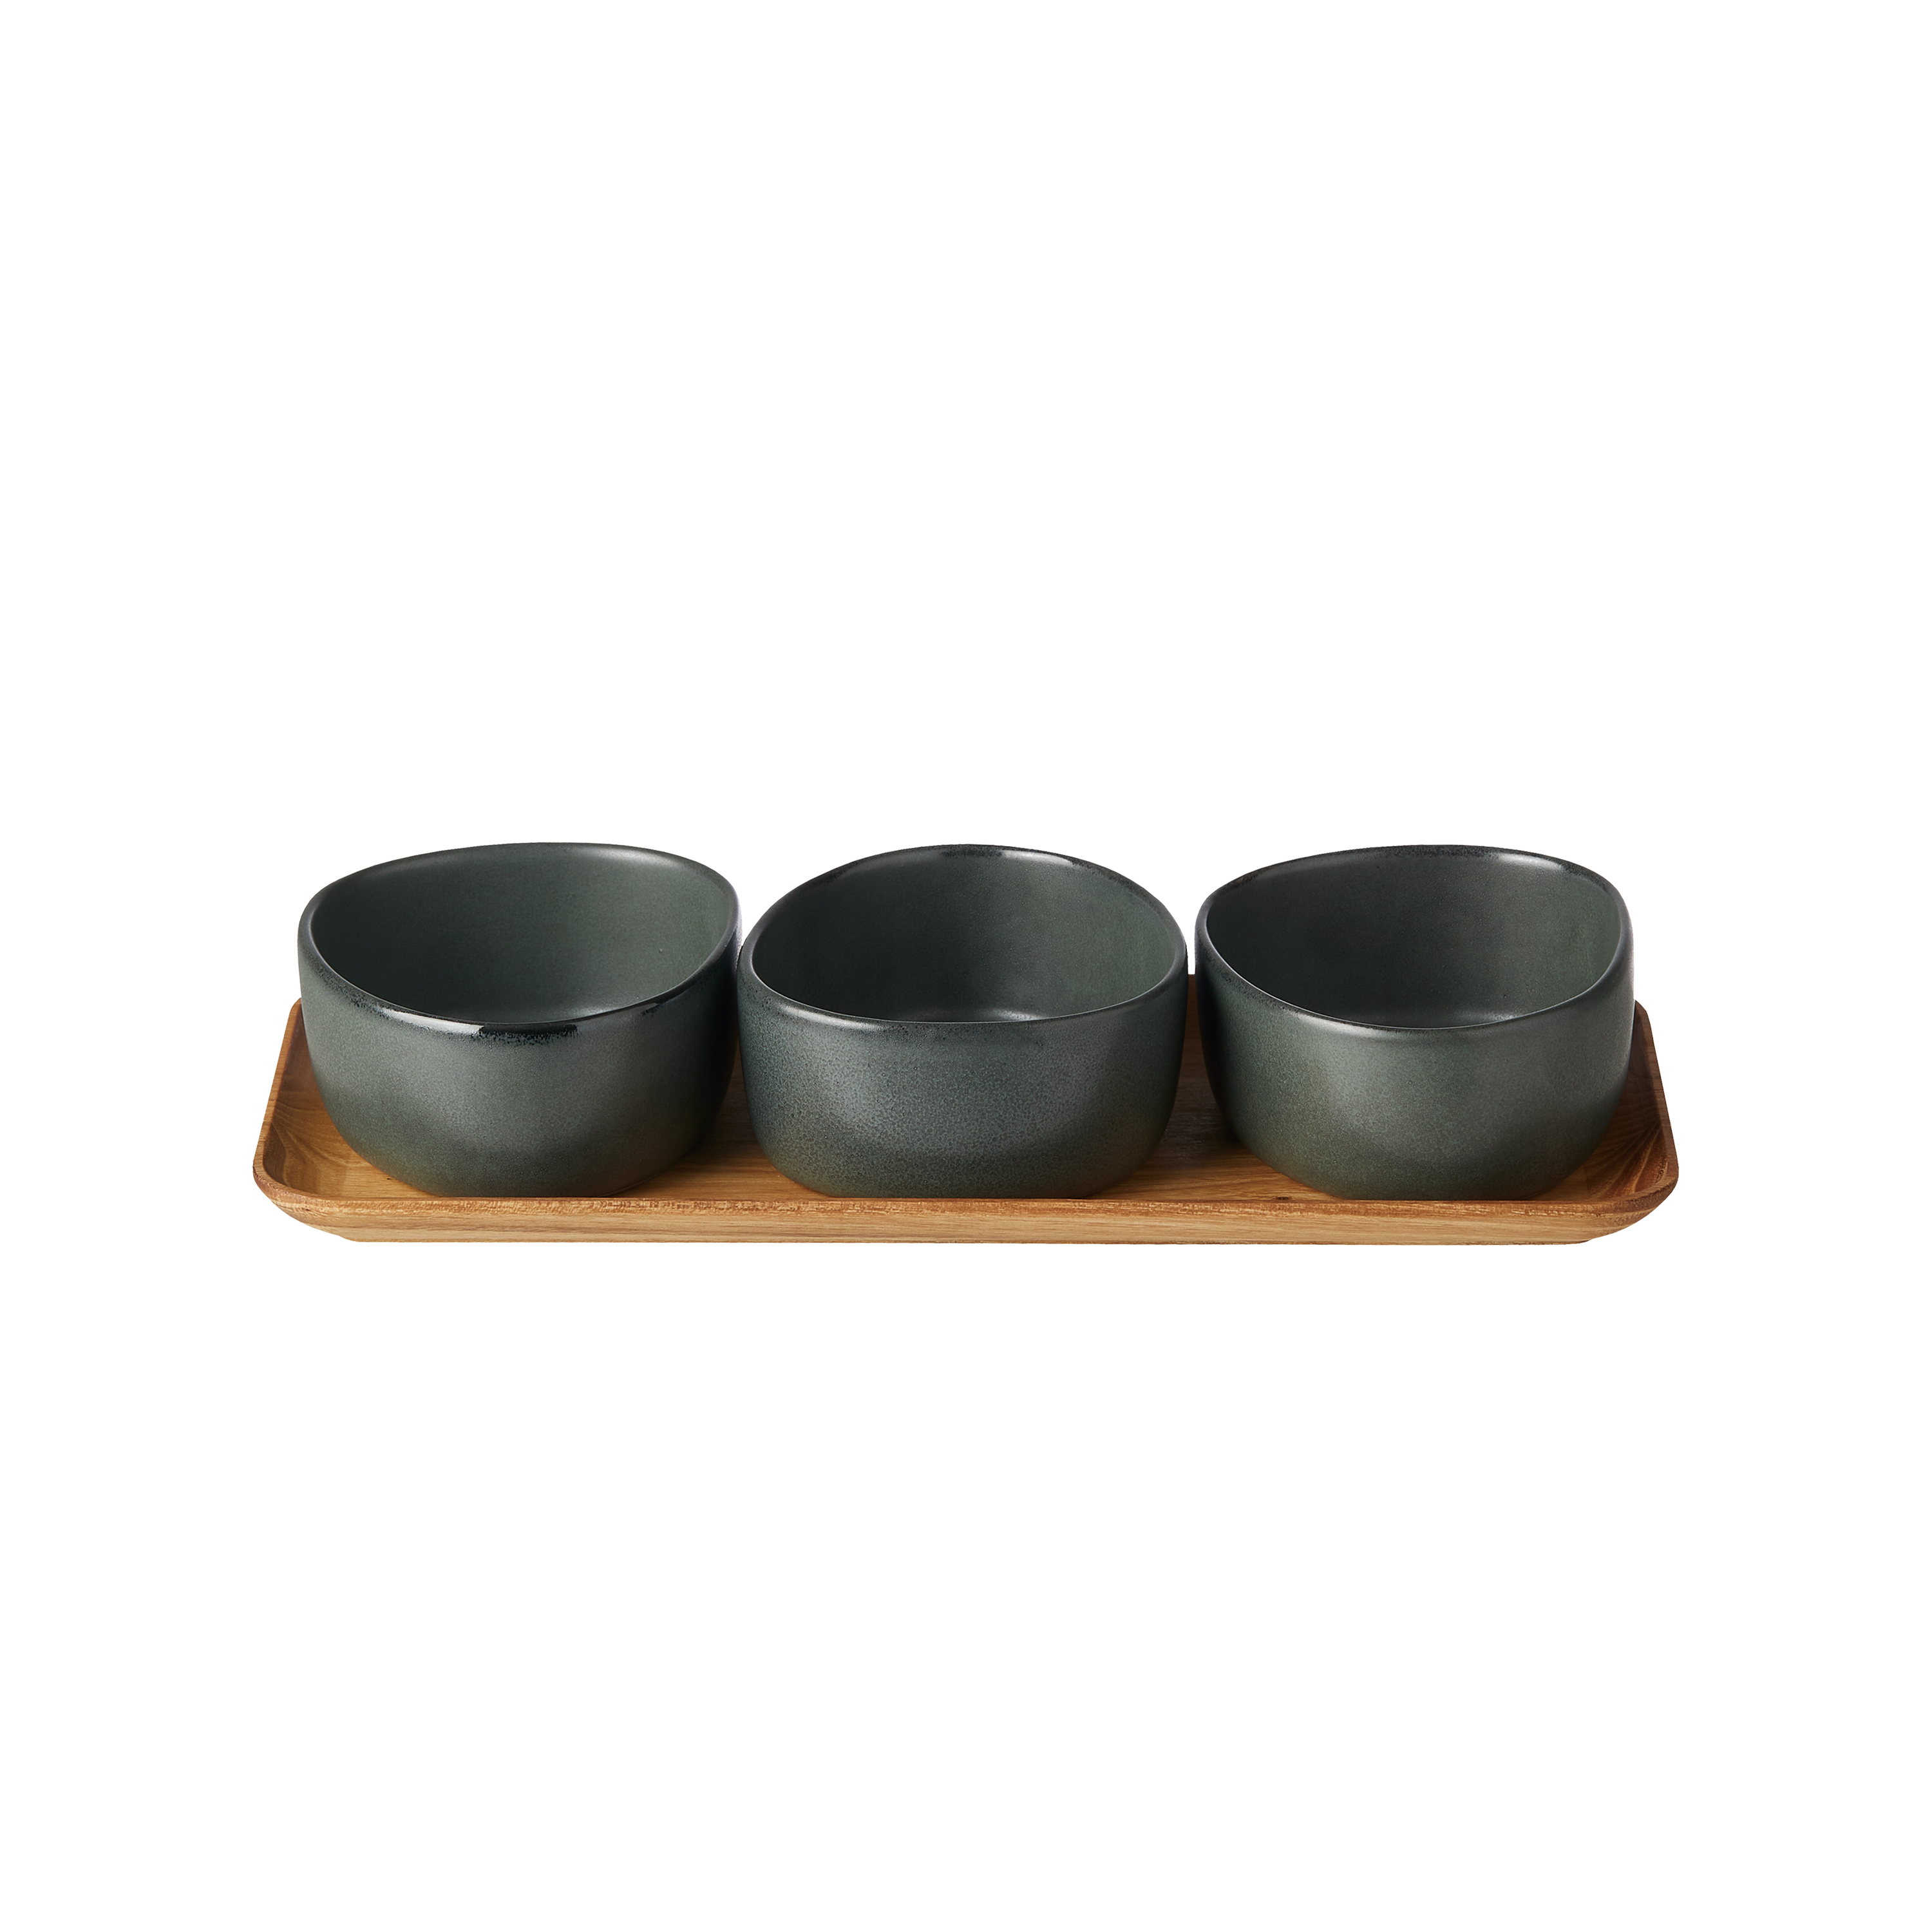 RAW crafted - 3 x Organic bowls on teakwooden board - Northern green (15810)